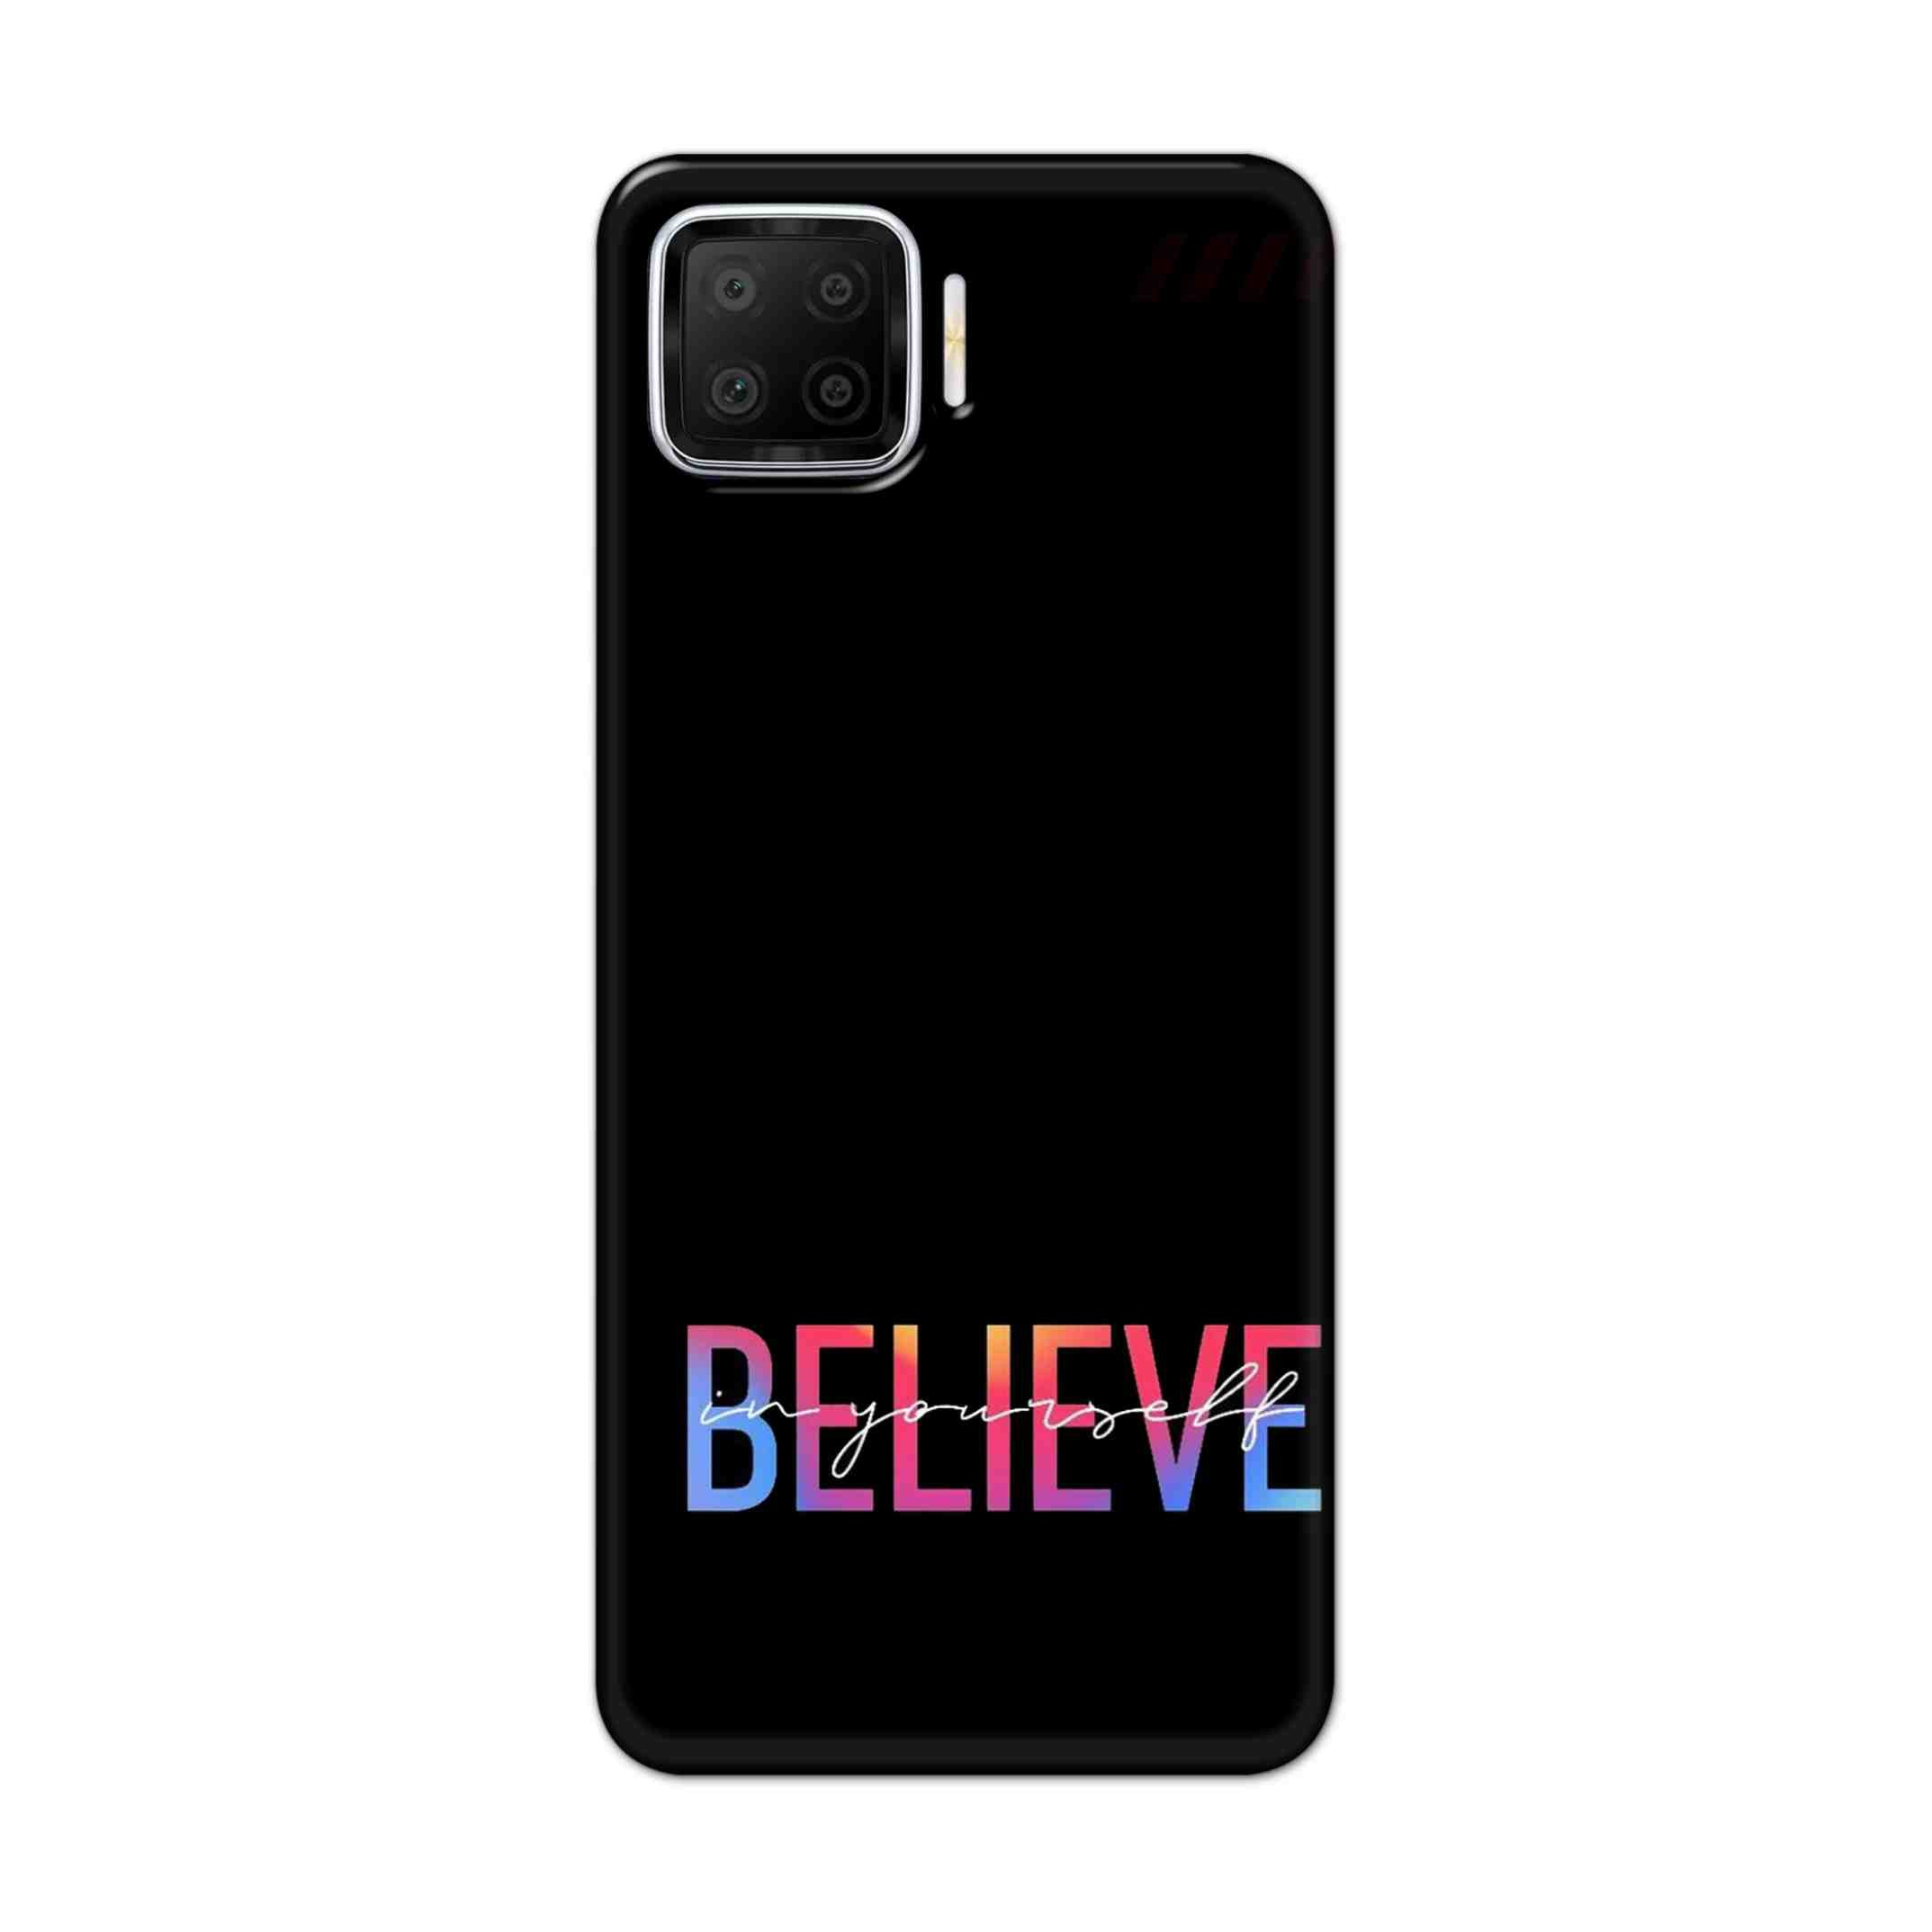 Buy Believe Hard Back Mobile Phone Case Cover For Oppo F17 Online